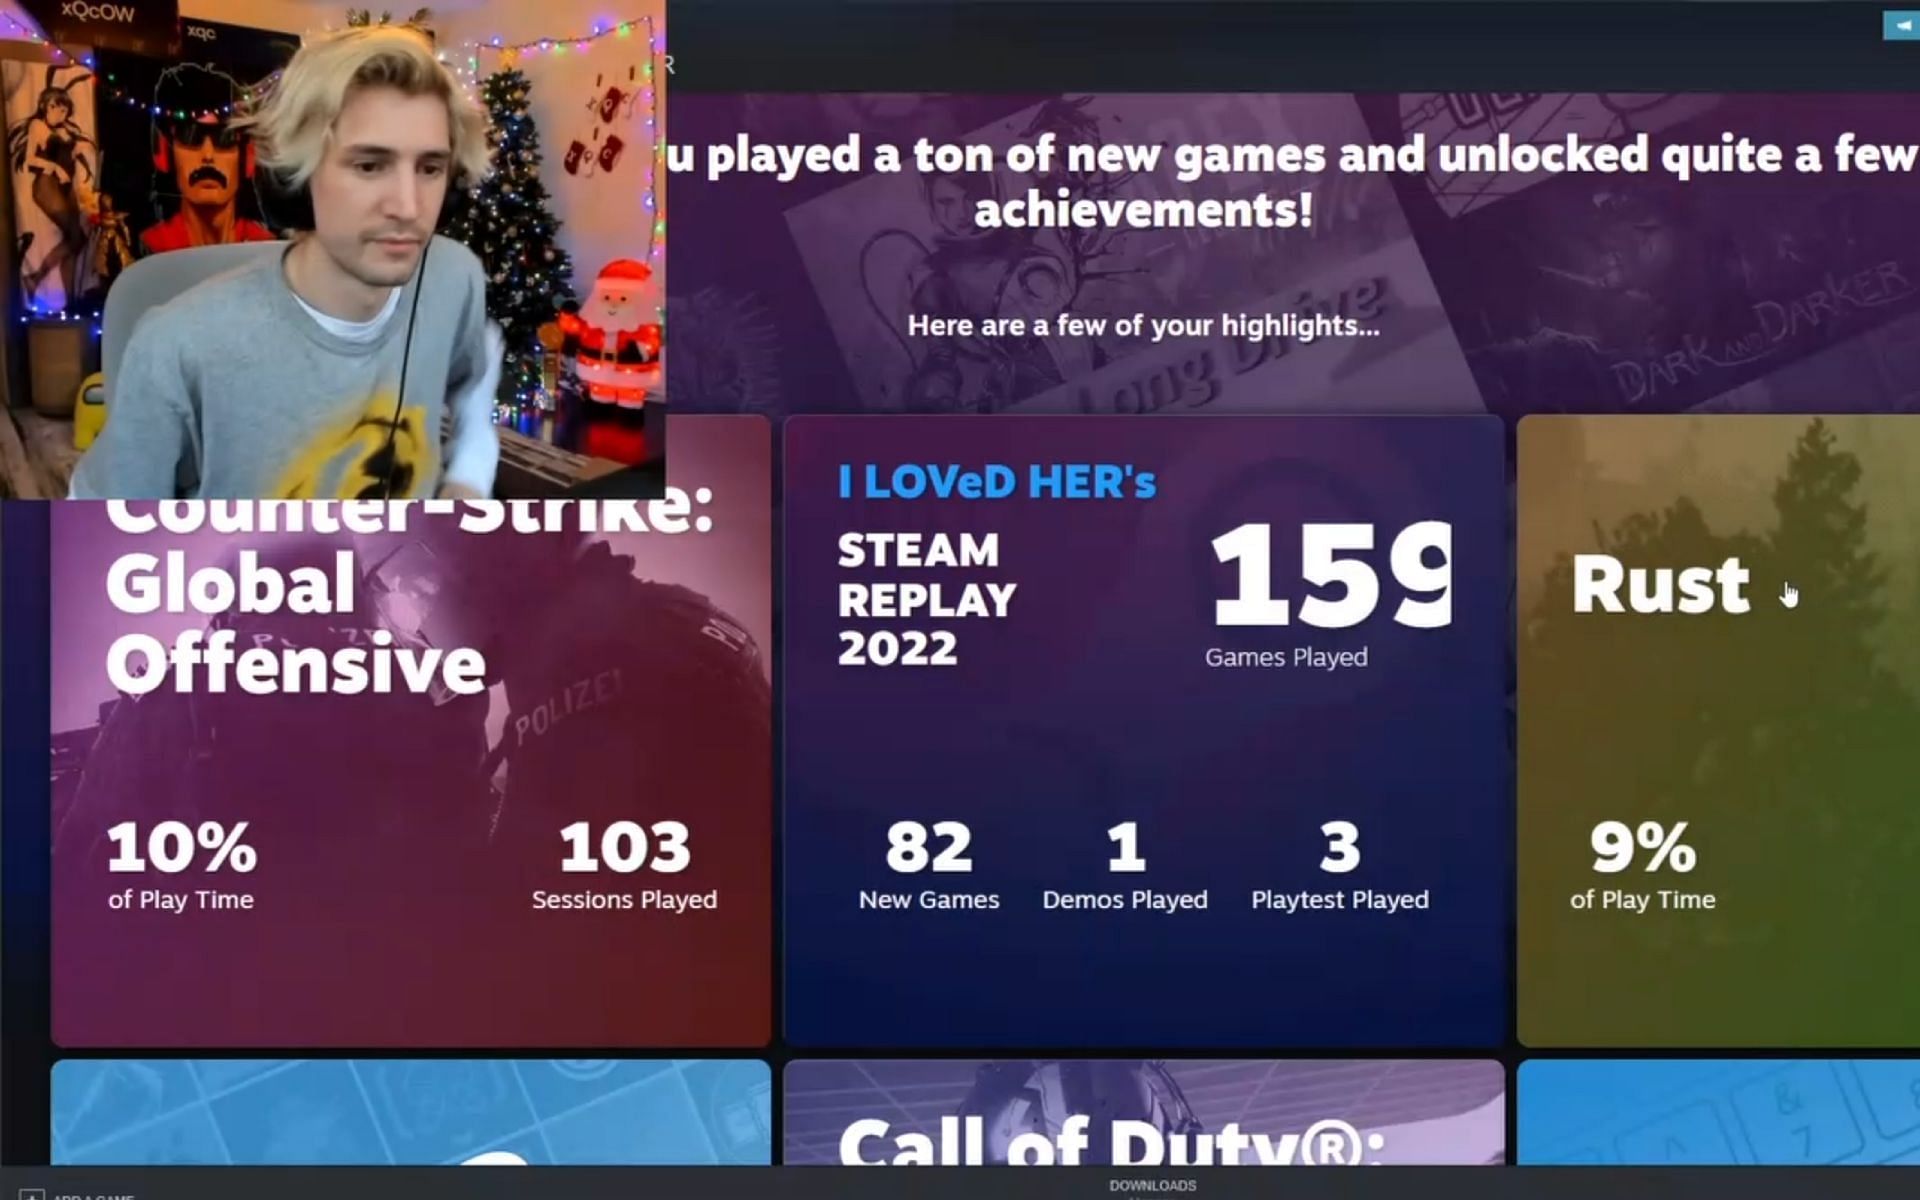 xQc showcases his Steam Replay 2022, reveals playing 159 games